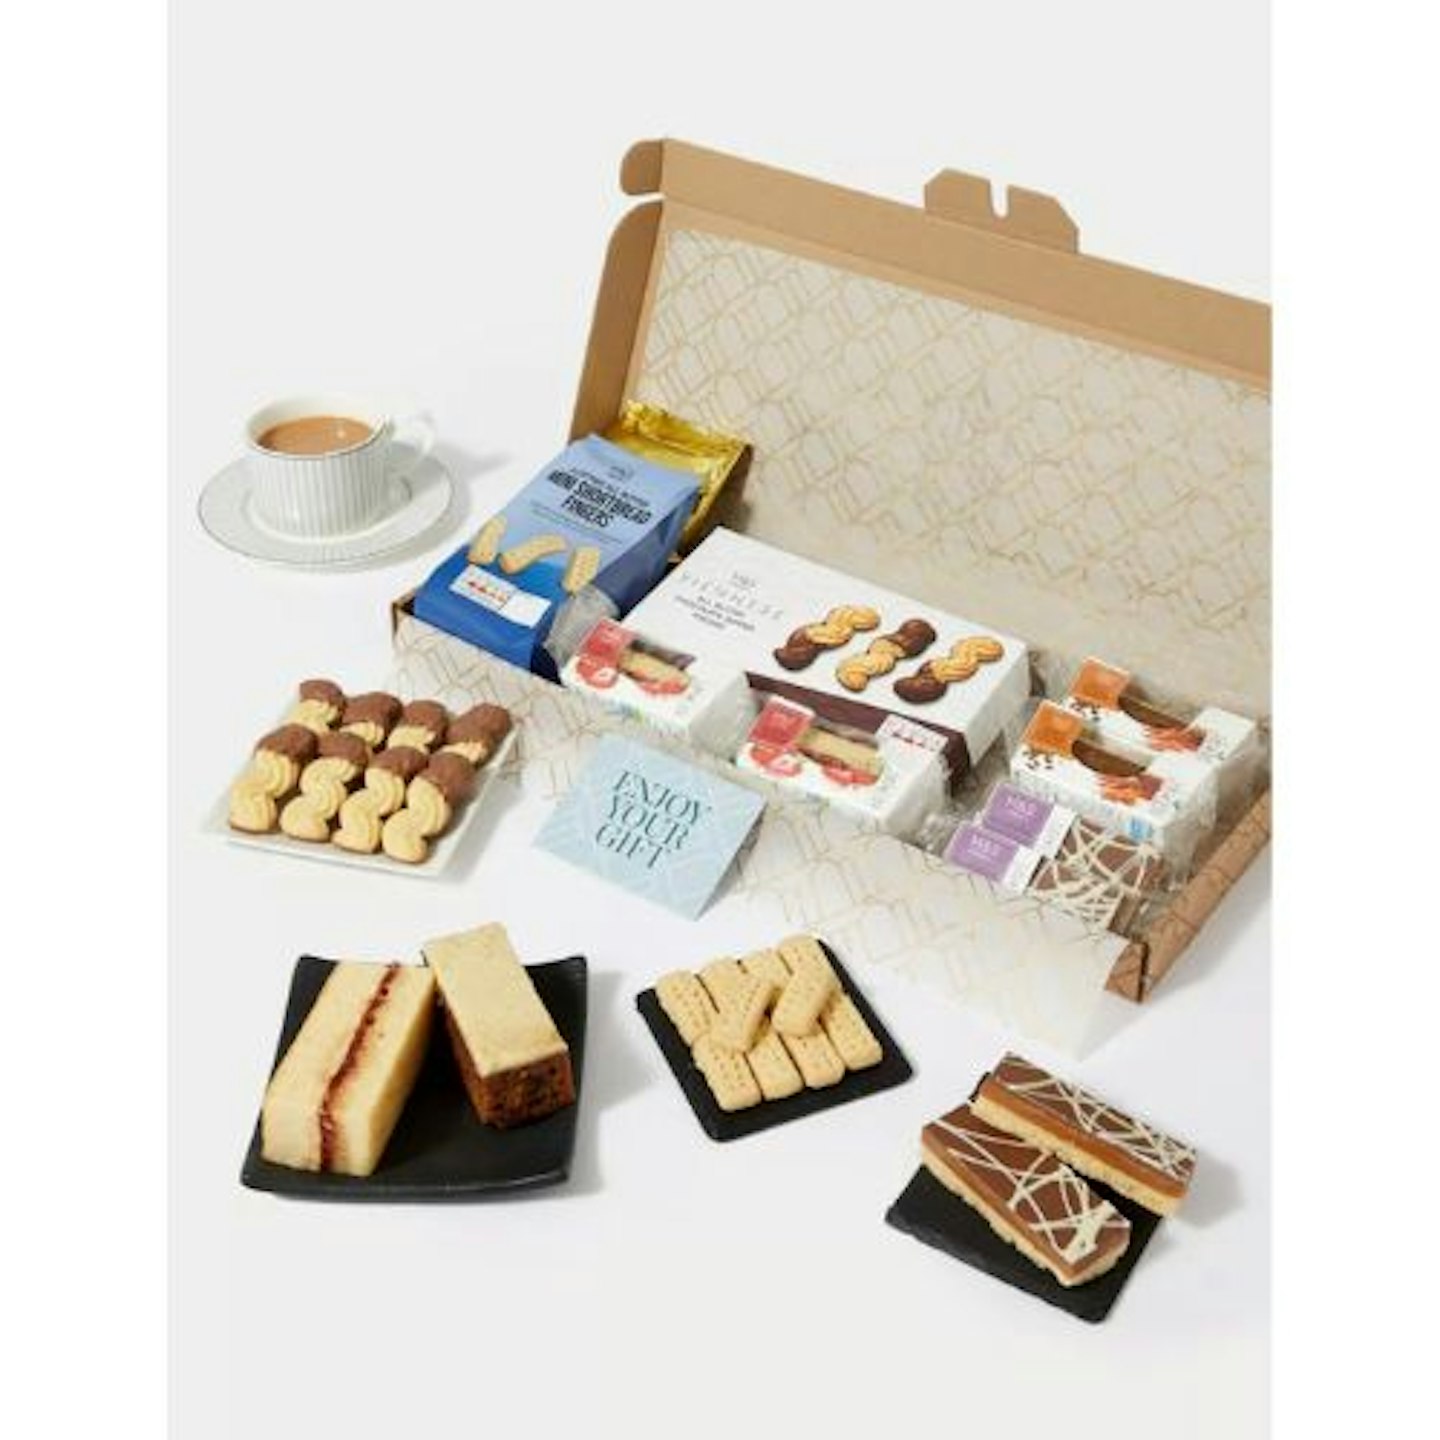 Best Mothers Day gifts for Nanny Afternoon Tea Letterbox